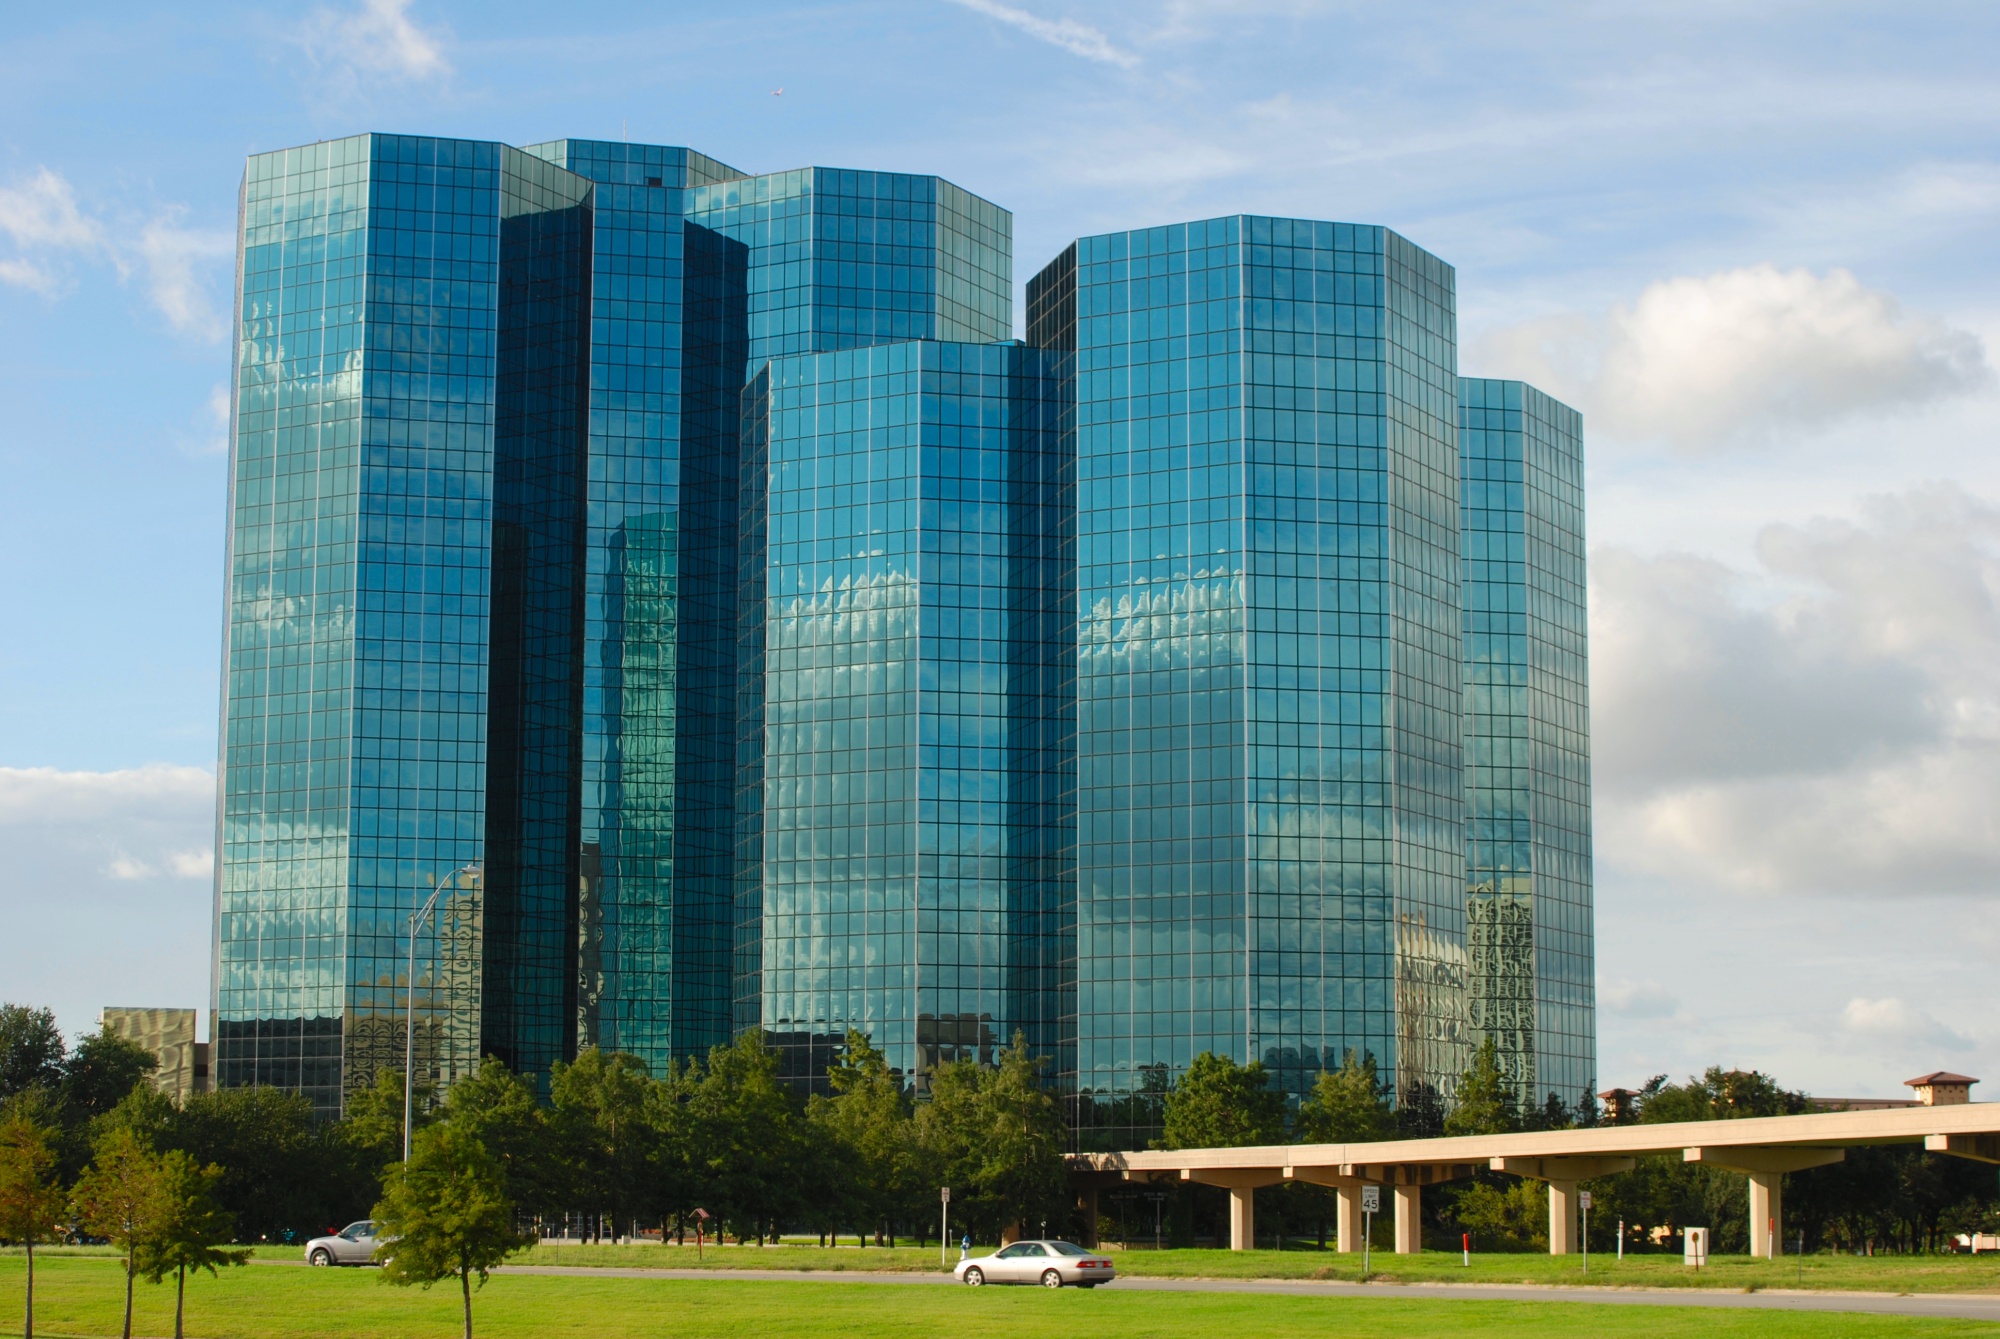 The Xerox Centre in Las Colinas, built&nbsp;in 1982 and now known as the Urban Towers, boasted&nbsp;its own&nbsp;monorail station.&nbsp;